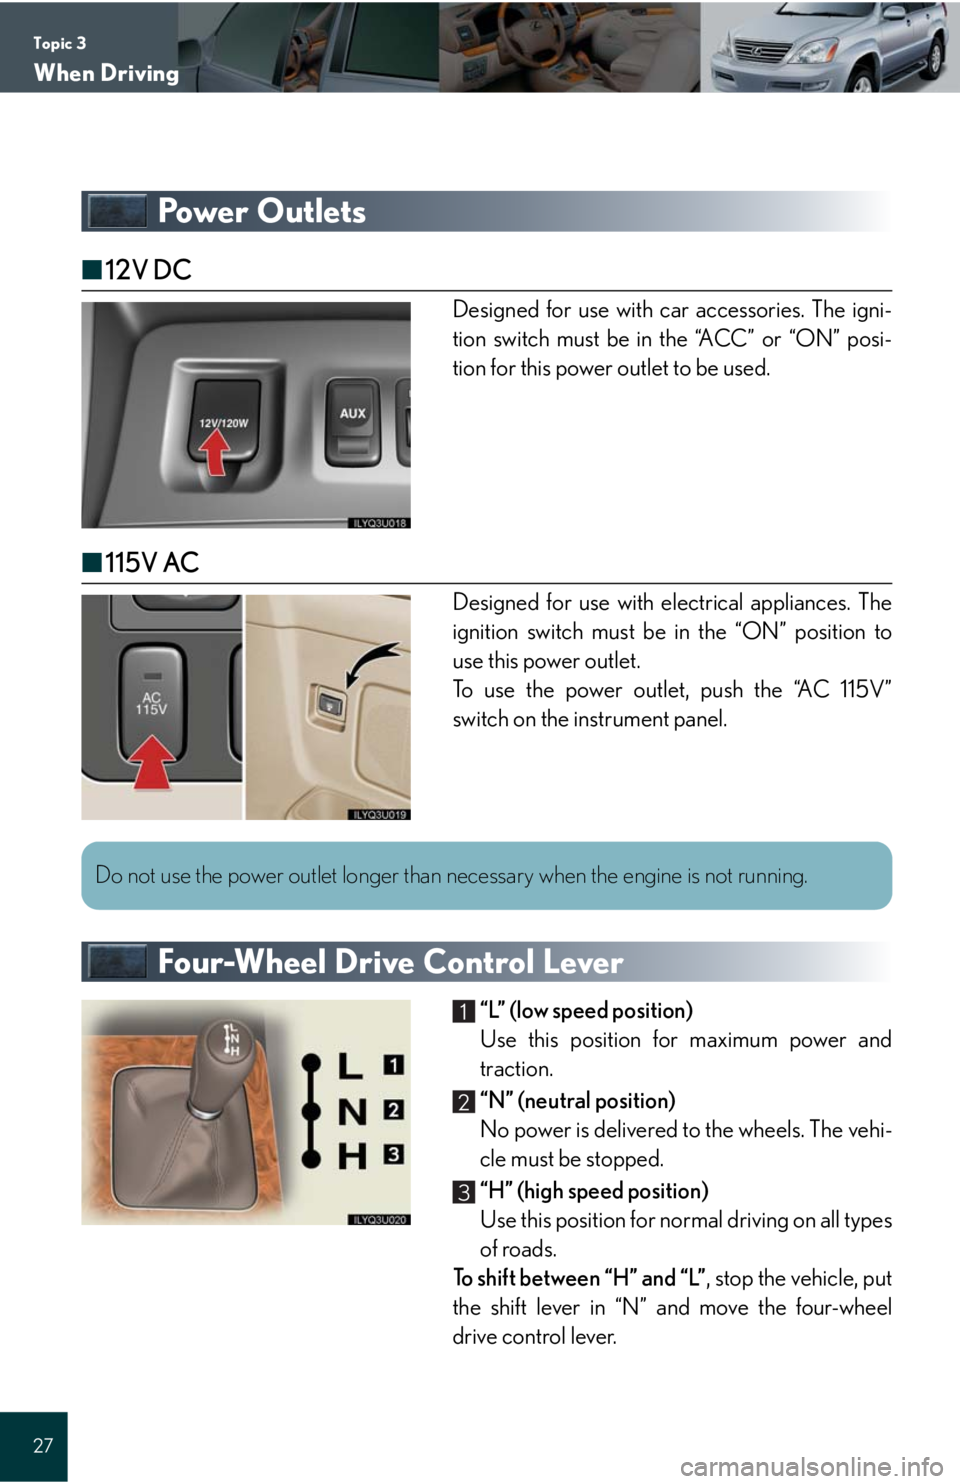 Lexus GX470 2008  Pictoral index / LEXUS 2008 GX470 QUICK GUIDE OWNERS MANUAL (OM60D81U) Topic 3
When Driving
27
Powe r  O u t l e t s
■12V DC
Designed for use with car accessories. The igni-
tion switch must be in the “ACC” or “ON” posi-
tion for this power outlet to be used.
�